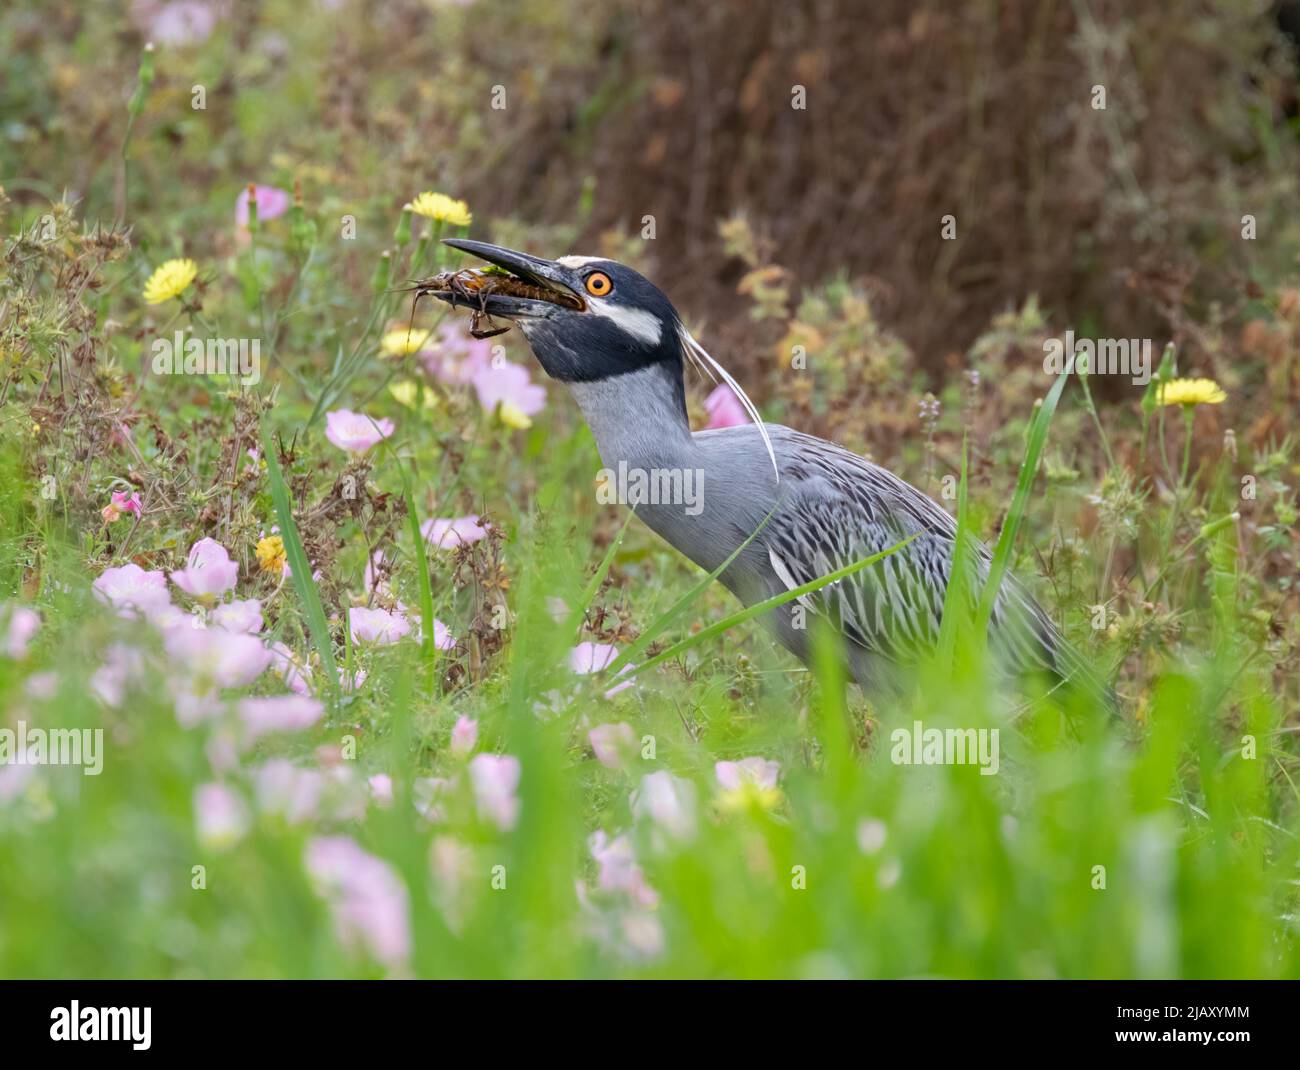 The yellow-crowned night heron (Nyctanassa violacea) eating  a crawfish on the flowering meadow background Stock Photo